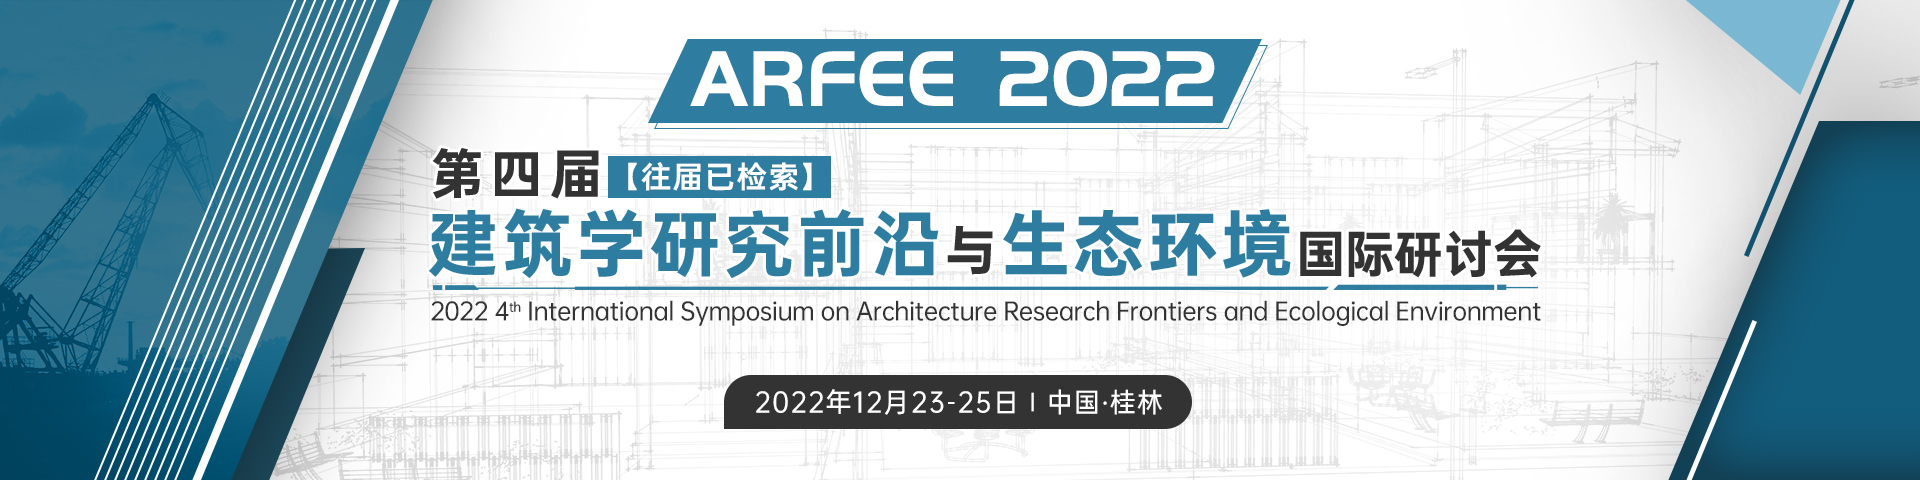 2022 4th International Symposium on Architecture Research Frontiers and Ecological Environment  (ARFEE 2022), Guilin, Guangxi, China,Guangxi,China